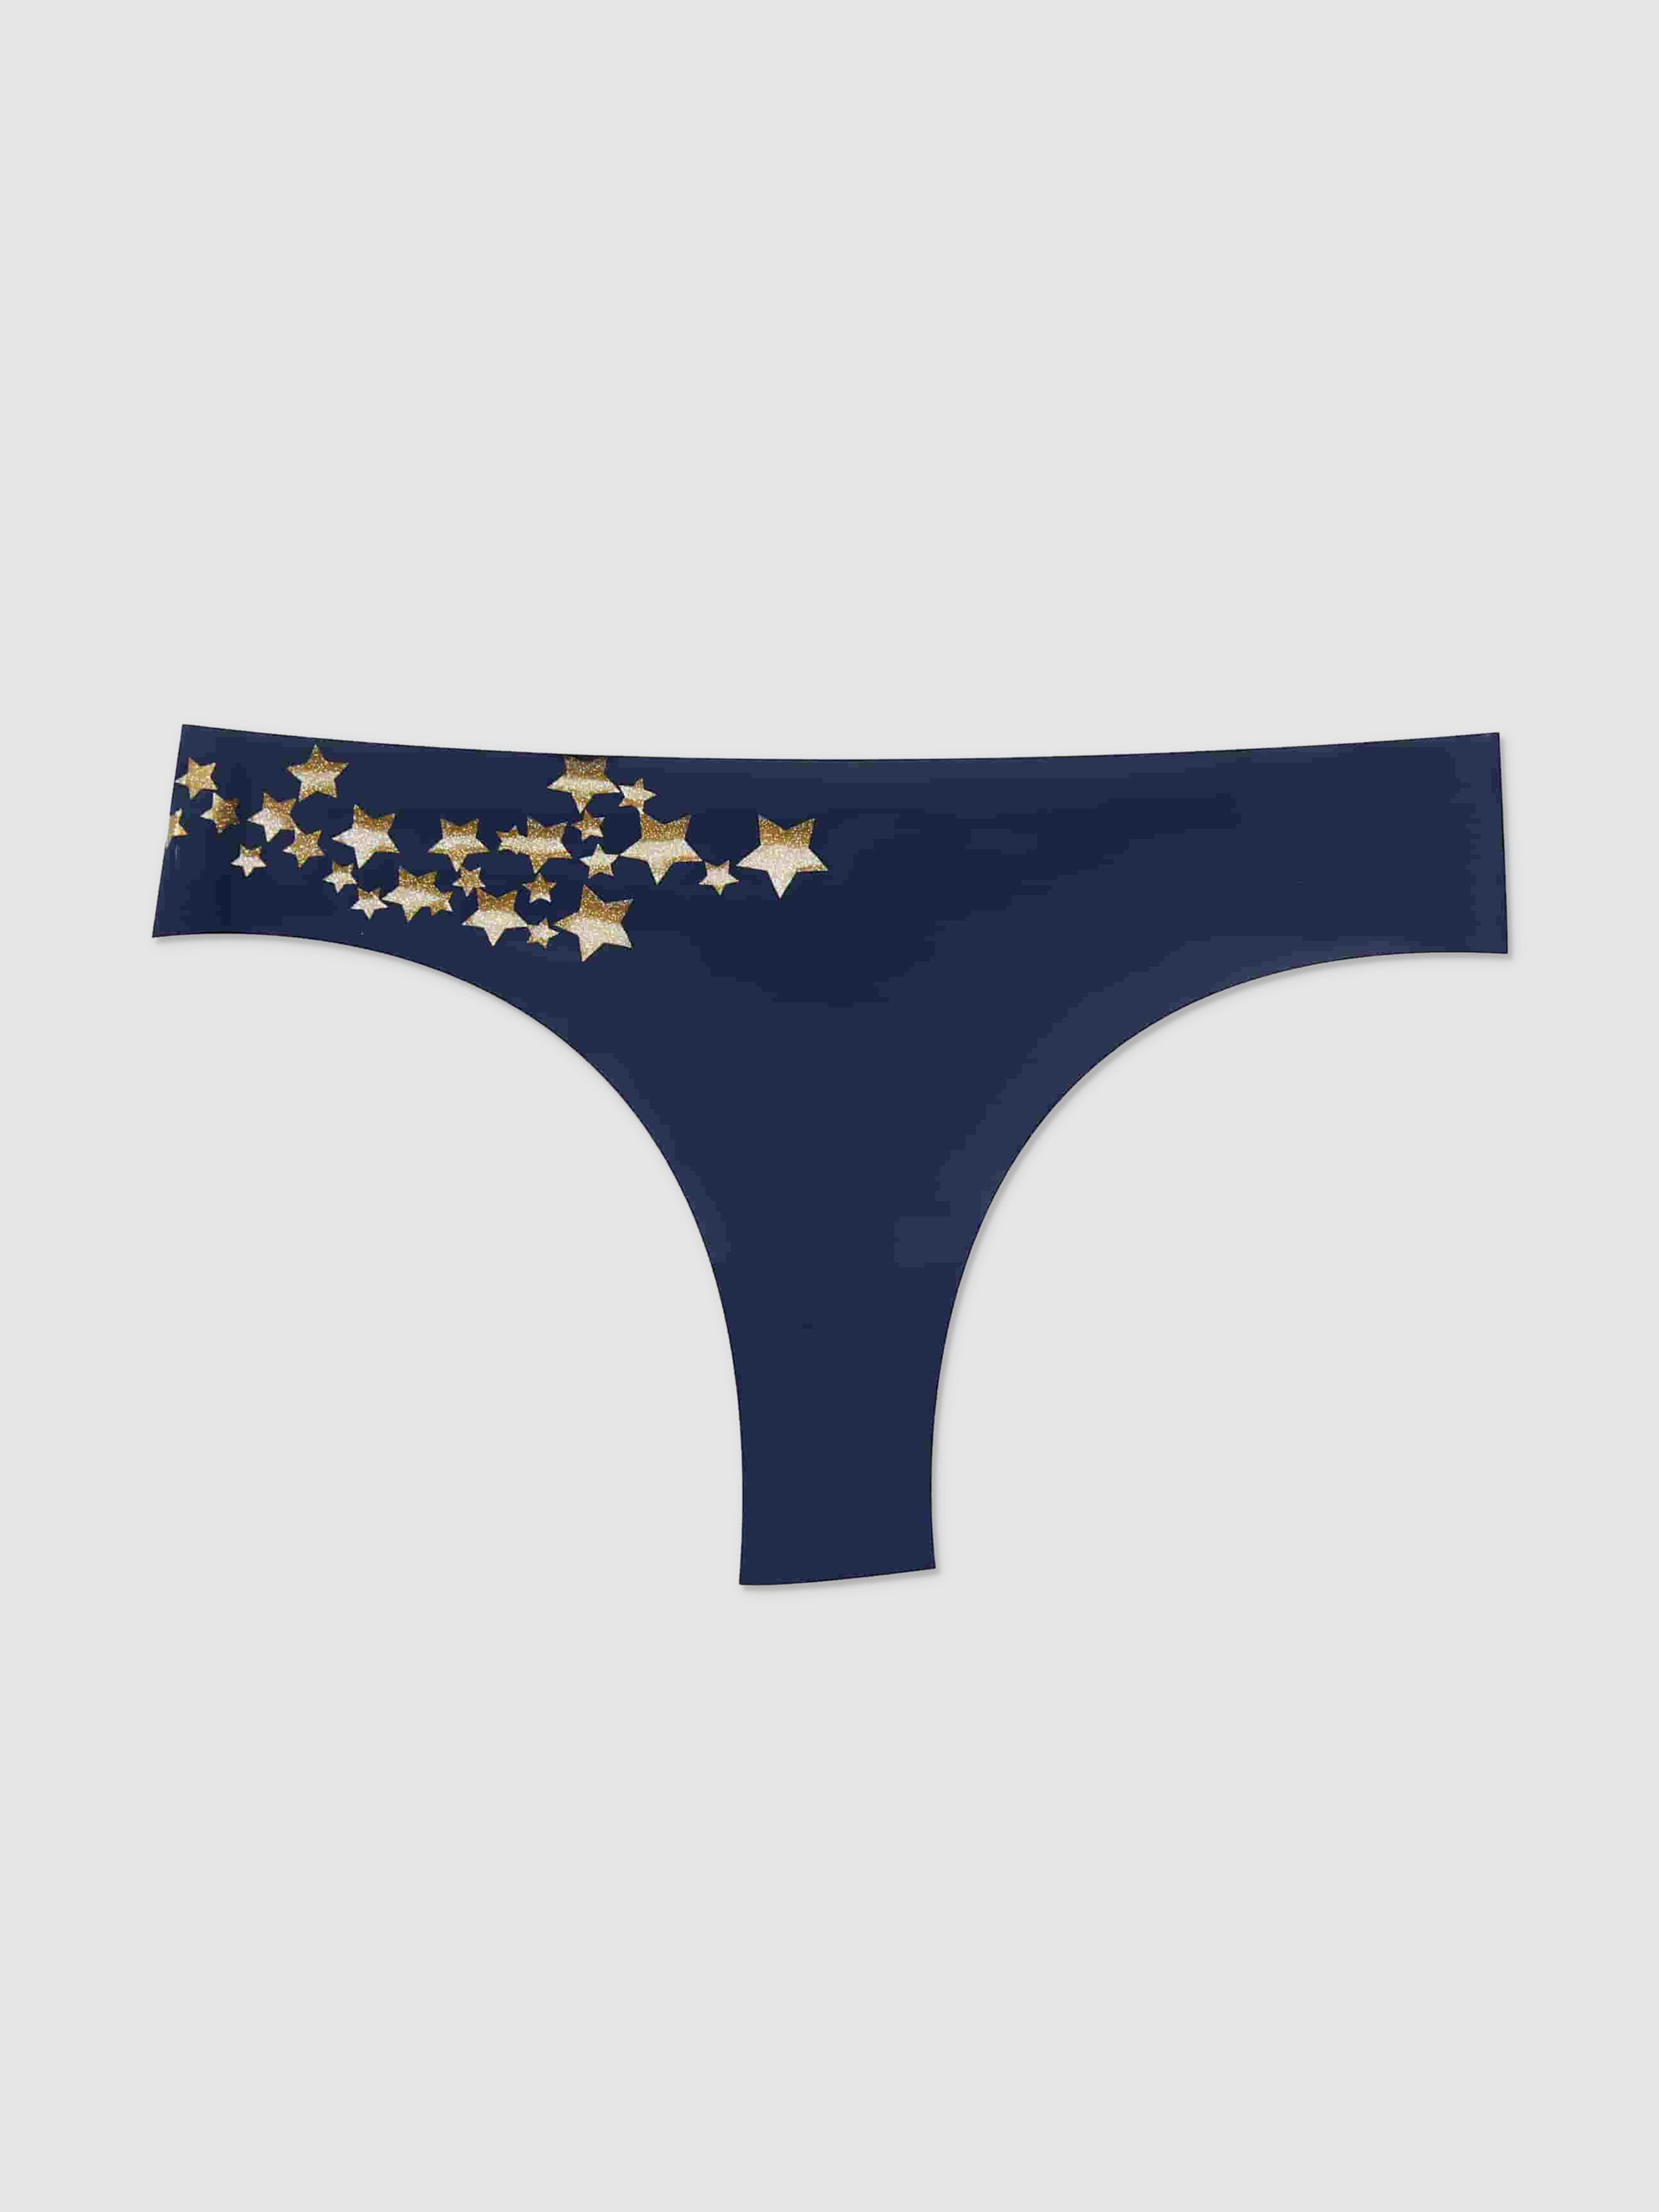 Uwila Warrior Vip Thong With Decals In Blue